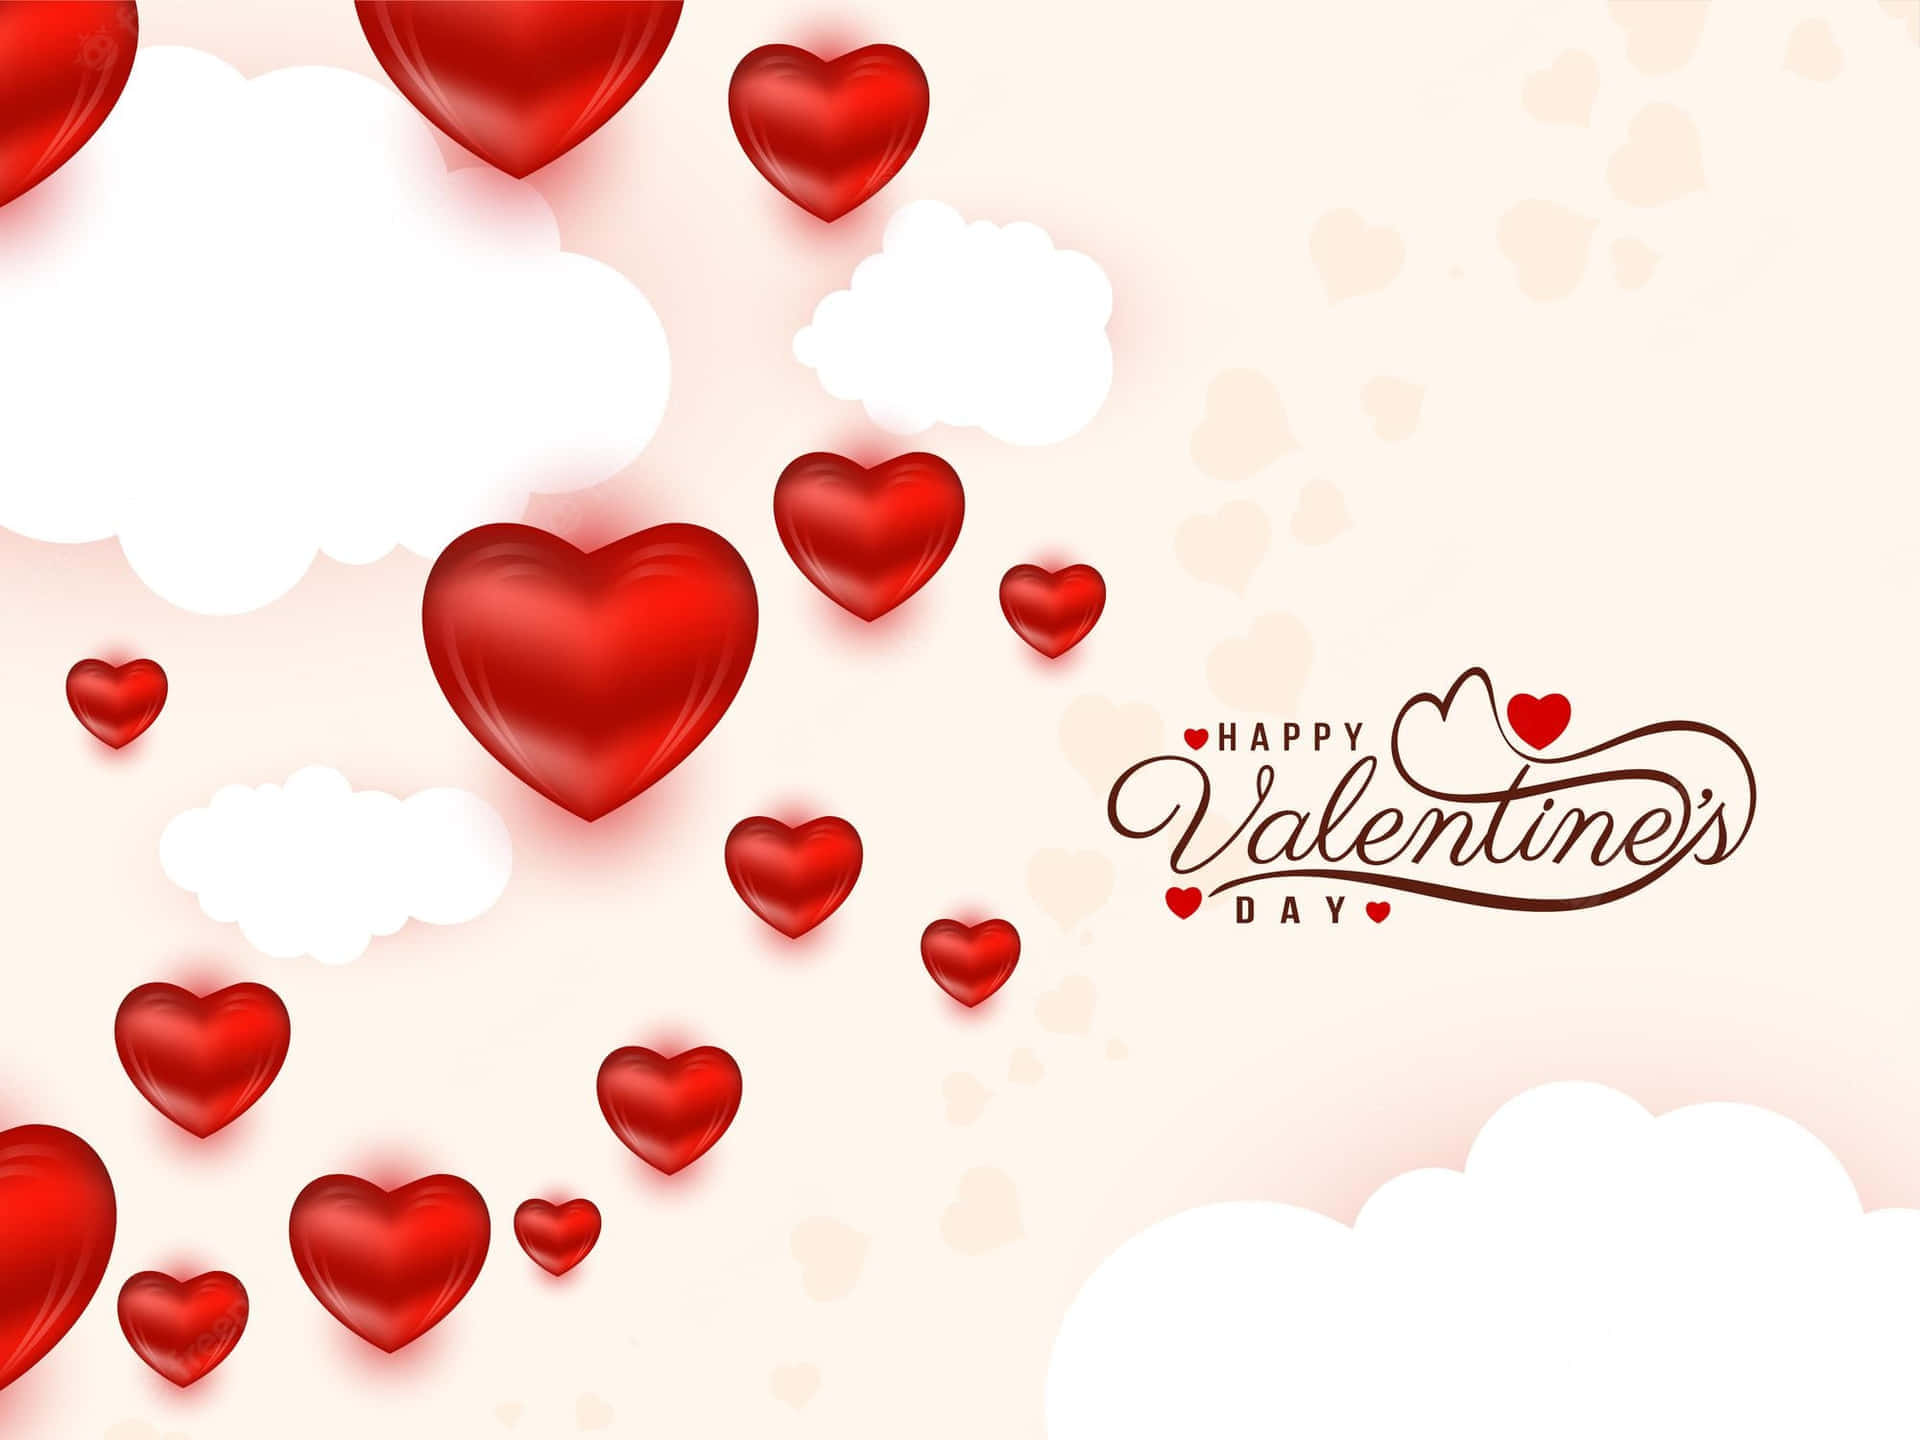 Romantic Happy Valentines Day Background with Hearts and Love